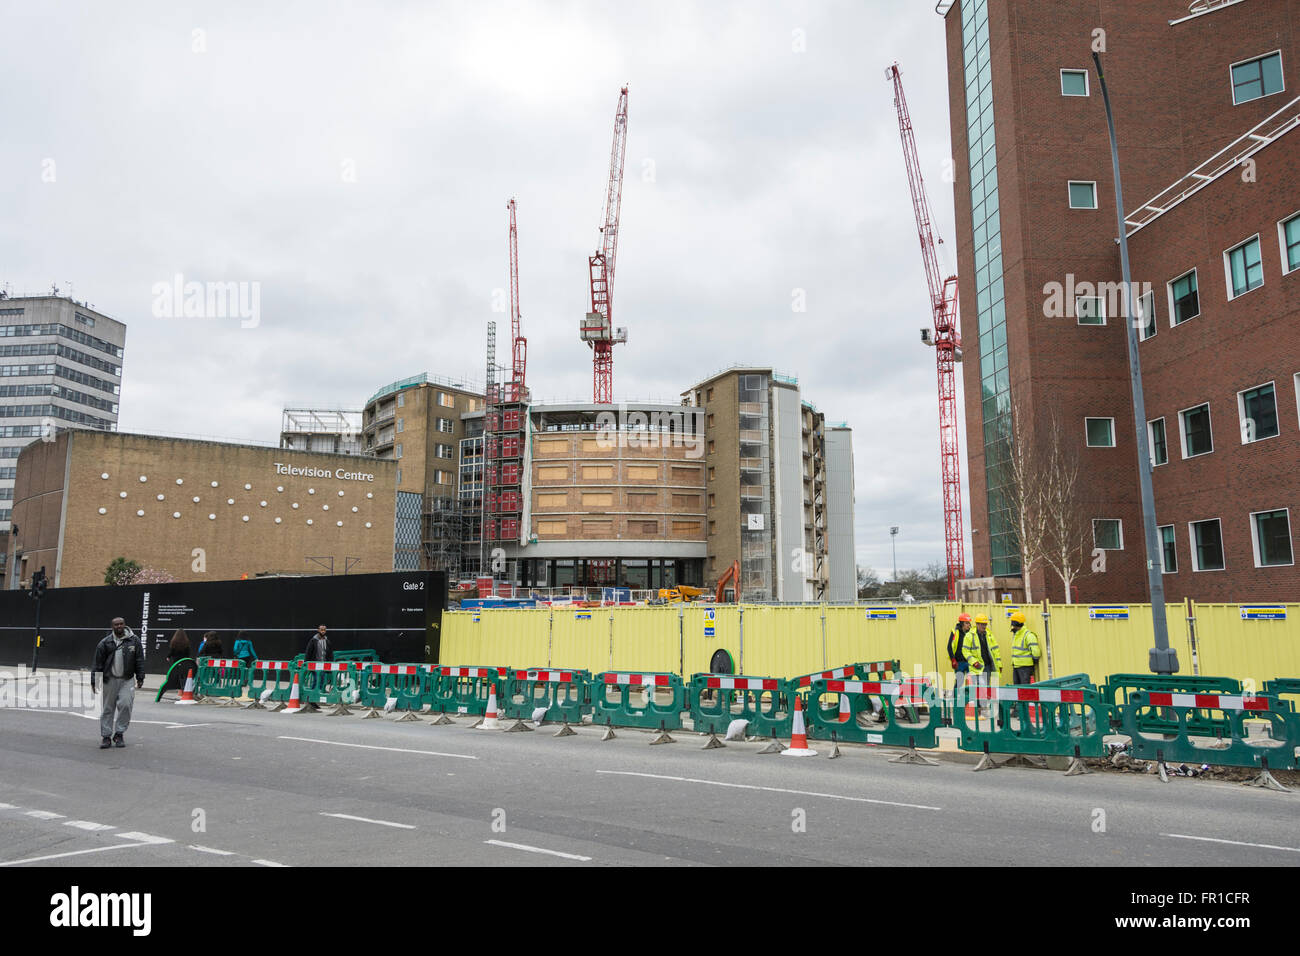 Building work on the site of the former BBC Television Centre Headquarters at White City in West London, England, U.K. Stock Photo